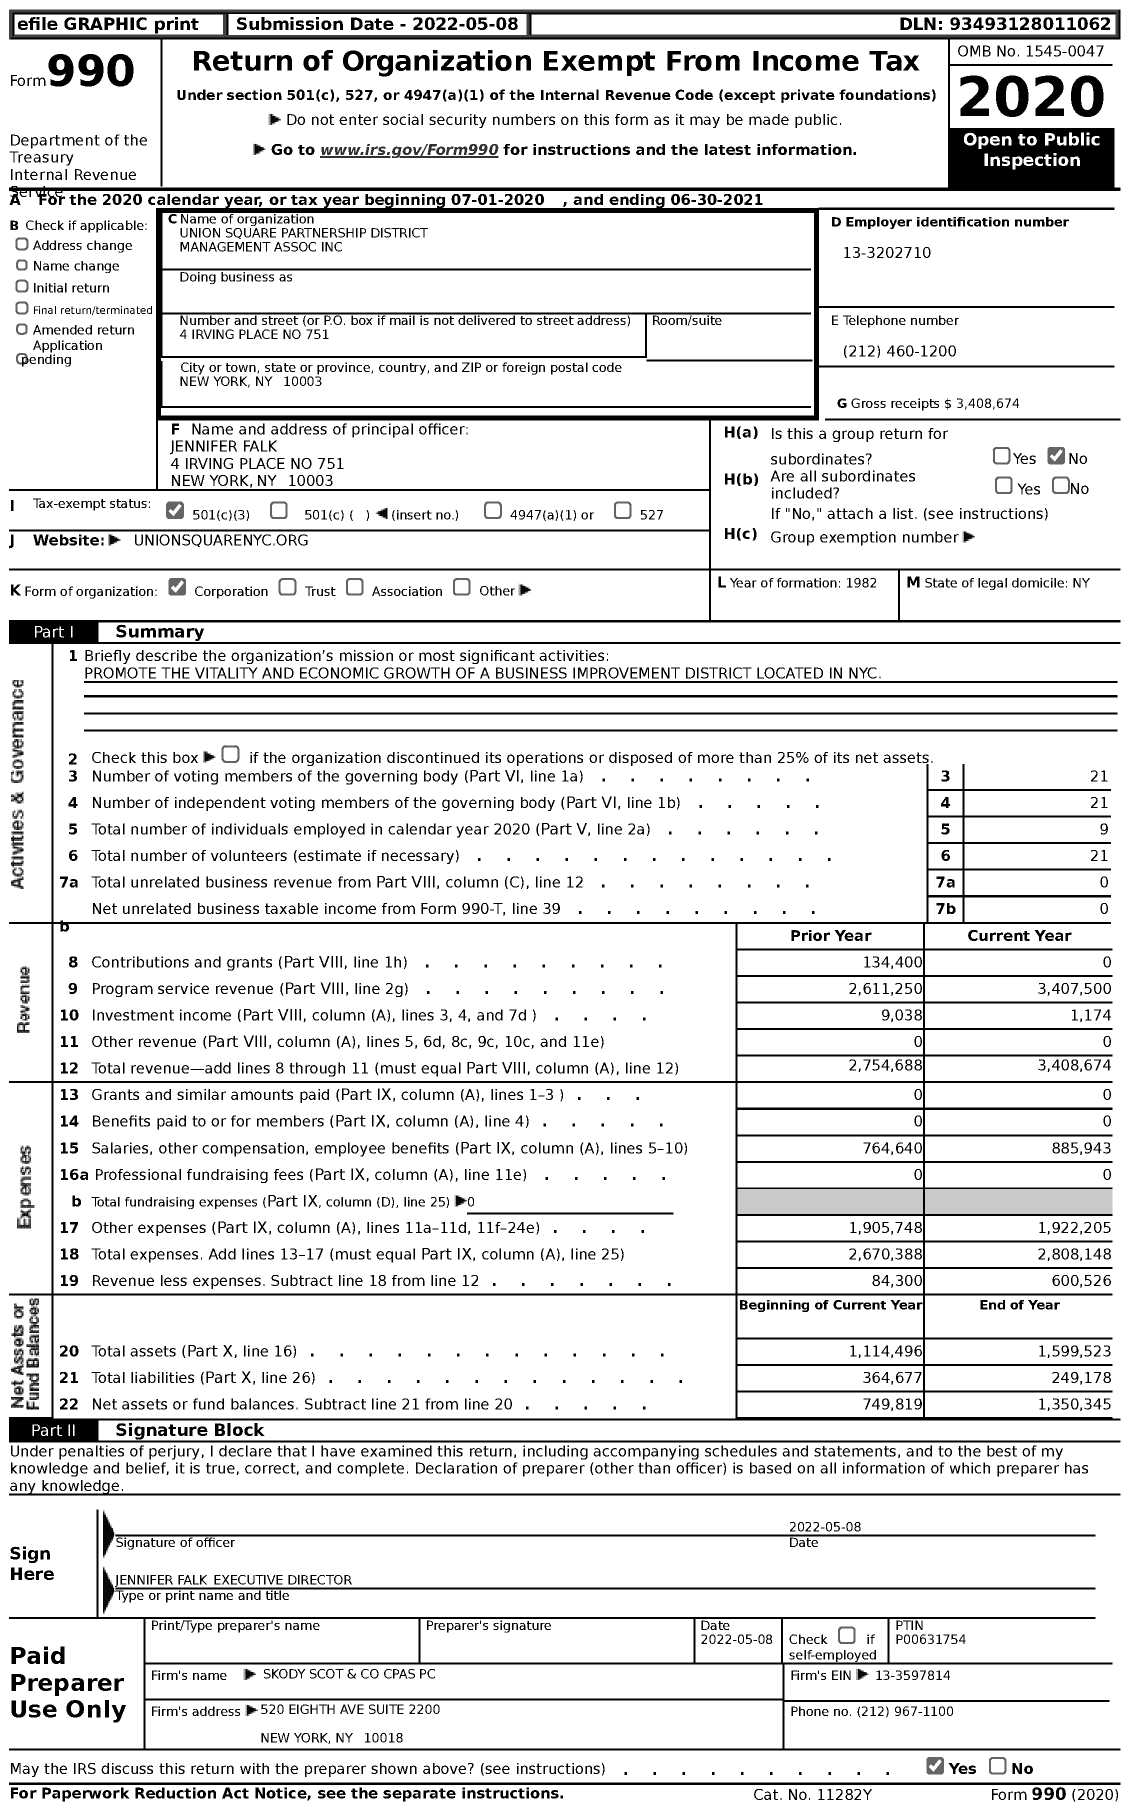 Image of first page of 2020 Form 990 for Union Square Partnership District Management Association (USP)